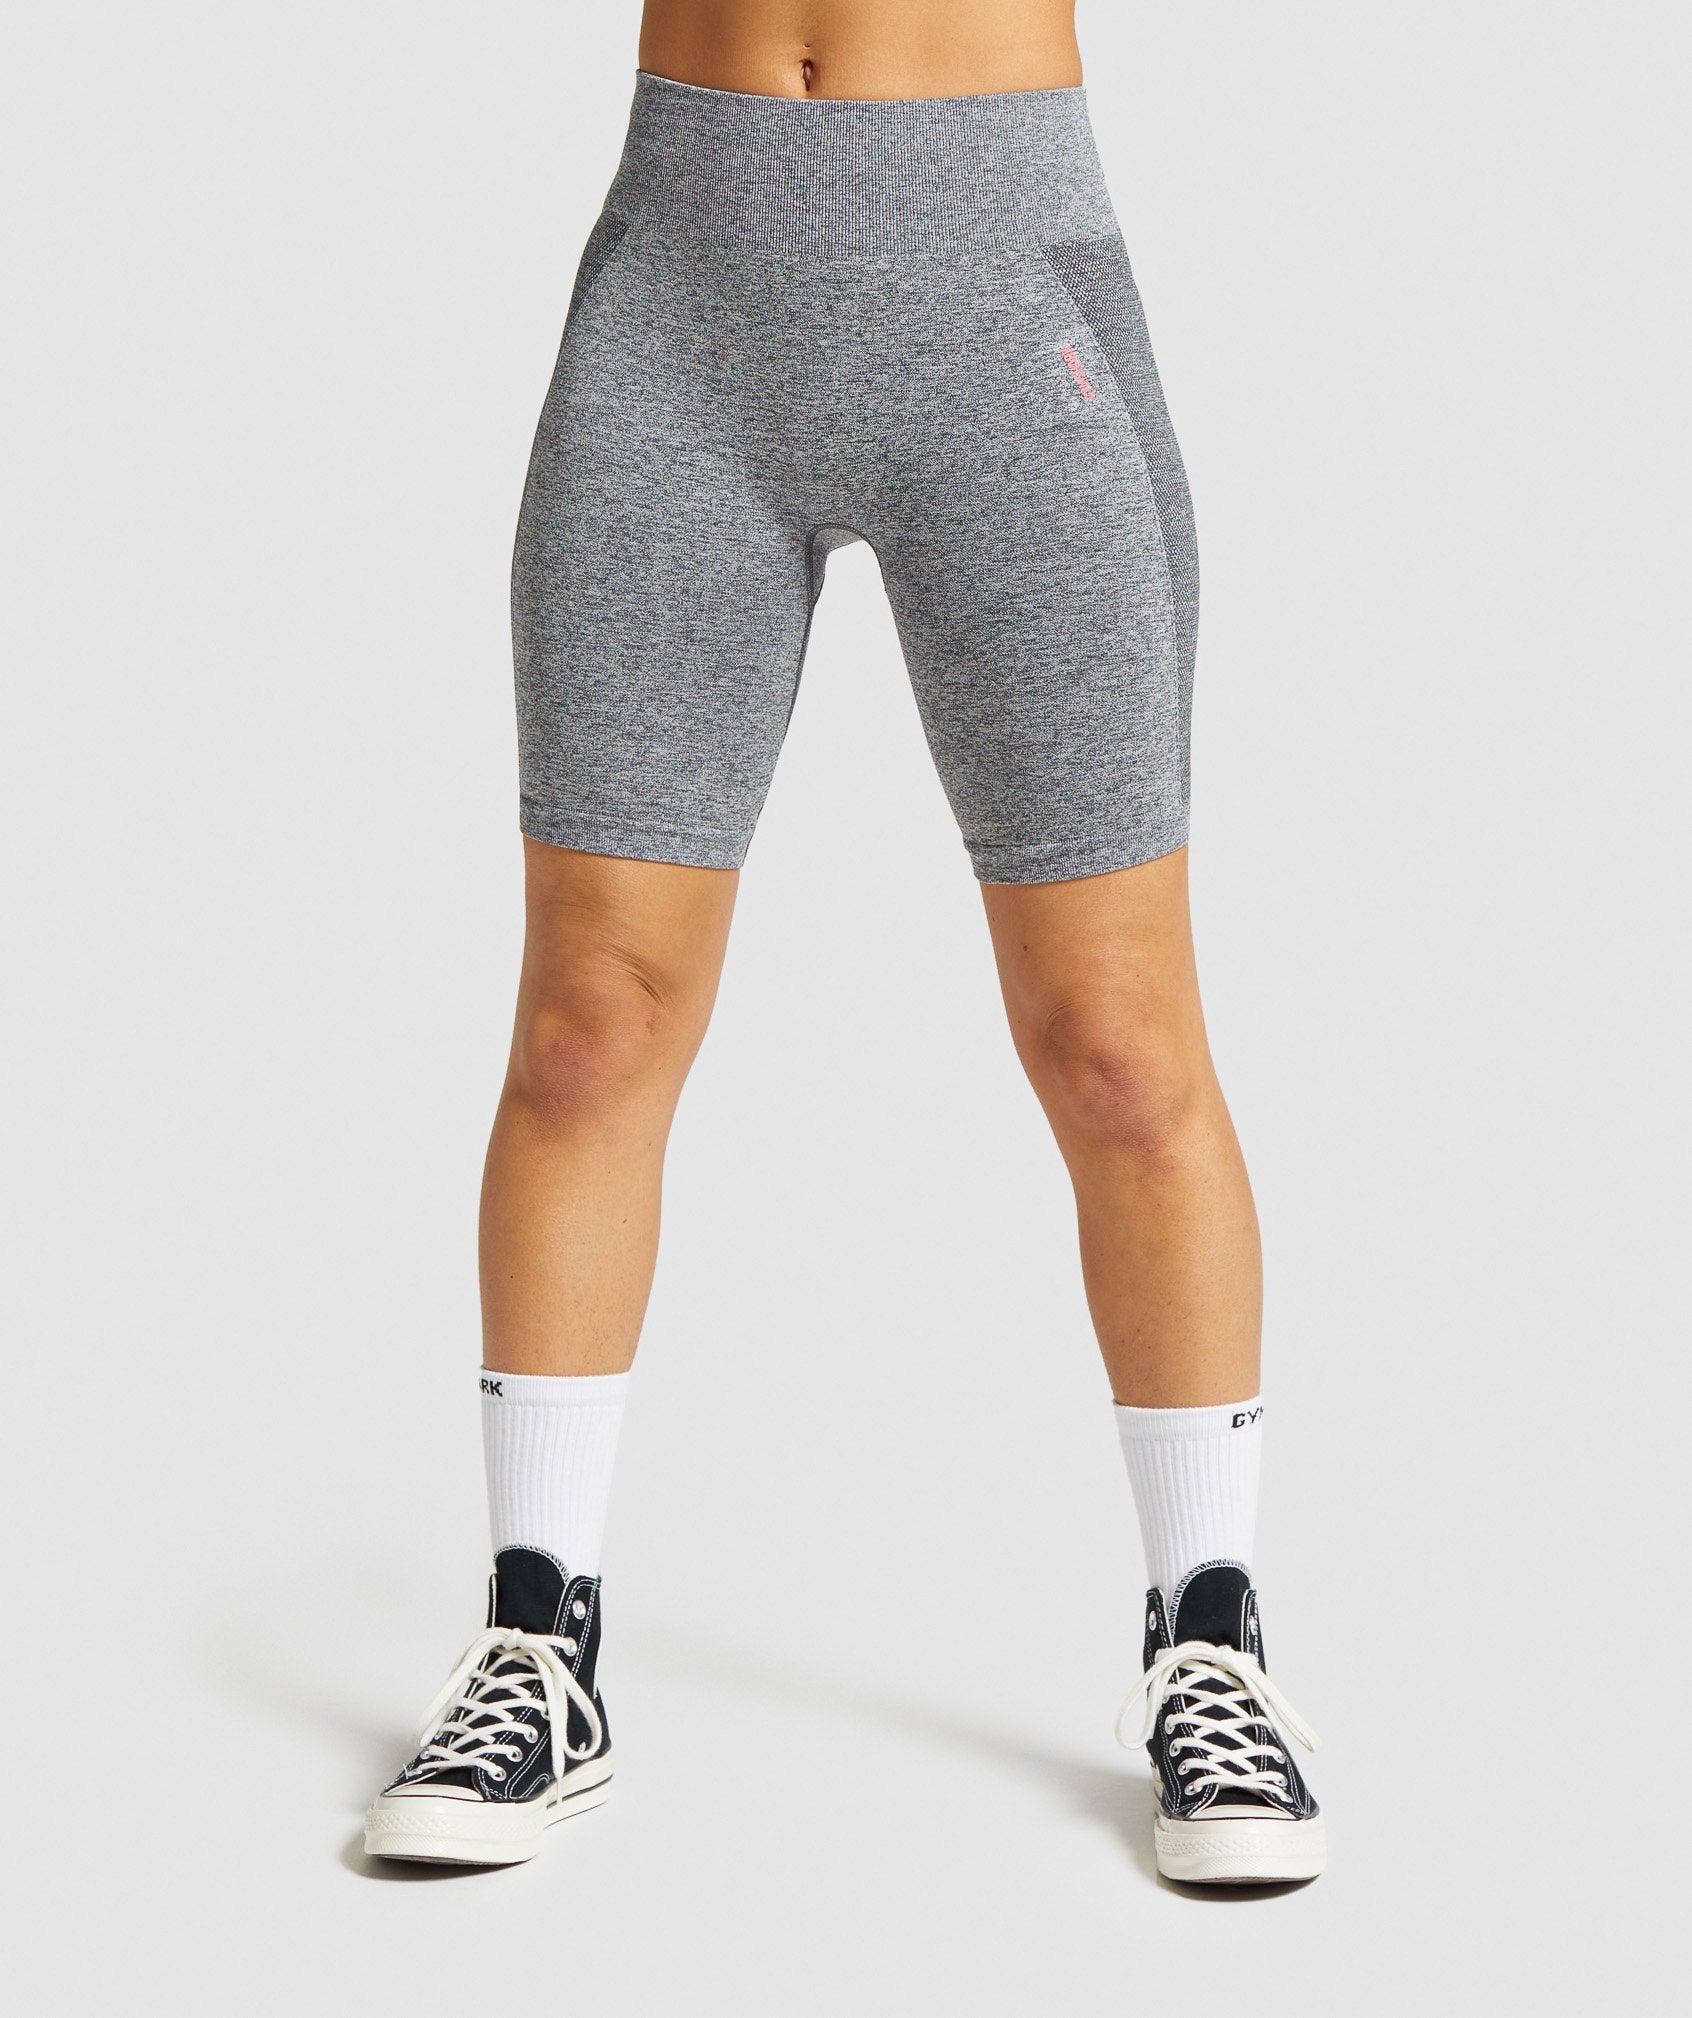 Flex Cycling Shorts in Charcoal Marl/Pink